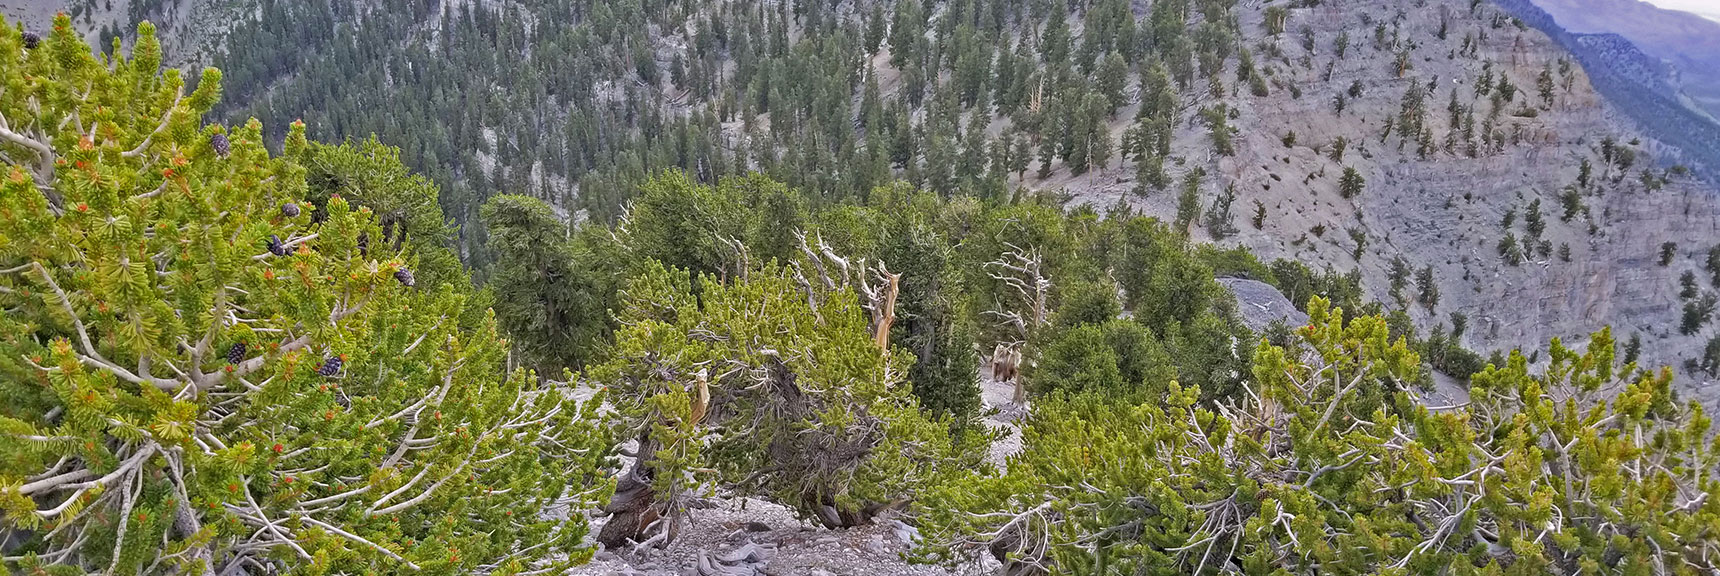 Heading Down Lee Peak's Opposite Ridge To Reconnect with the North Loop Trail | Lee and Charleston Peaks via Lee Canyon Mid Ridge | Mt Charleston Wilderness | Spring Mountains, Nevada